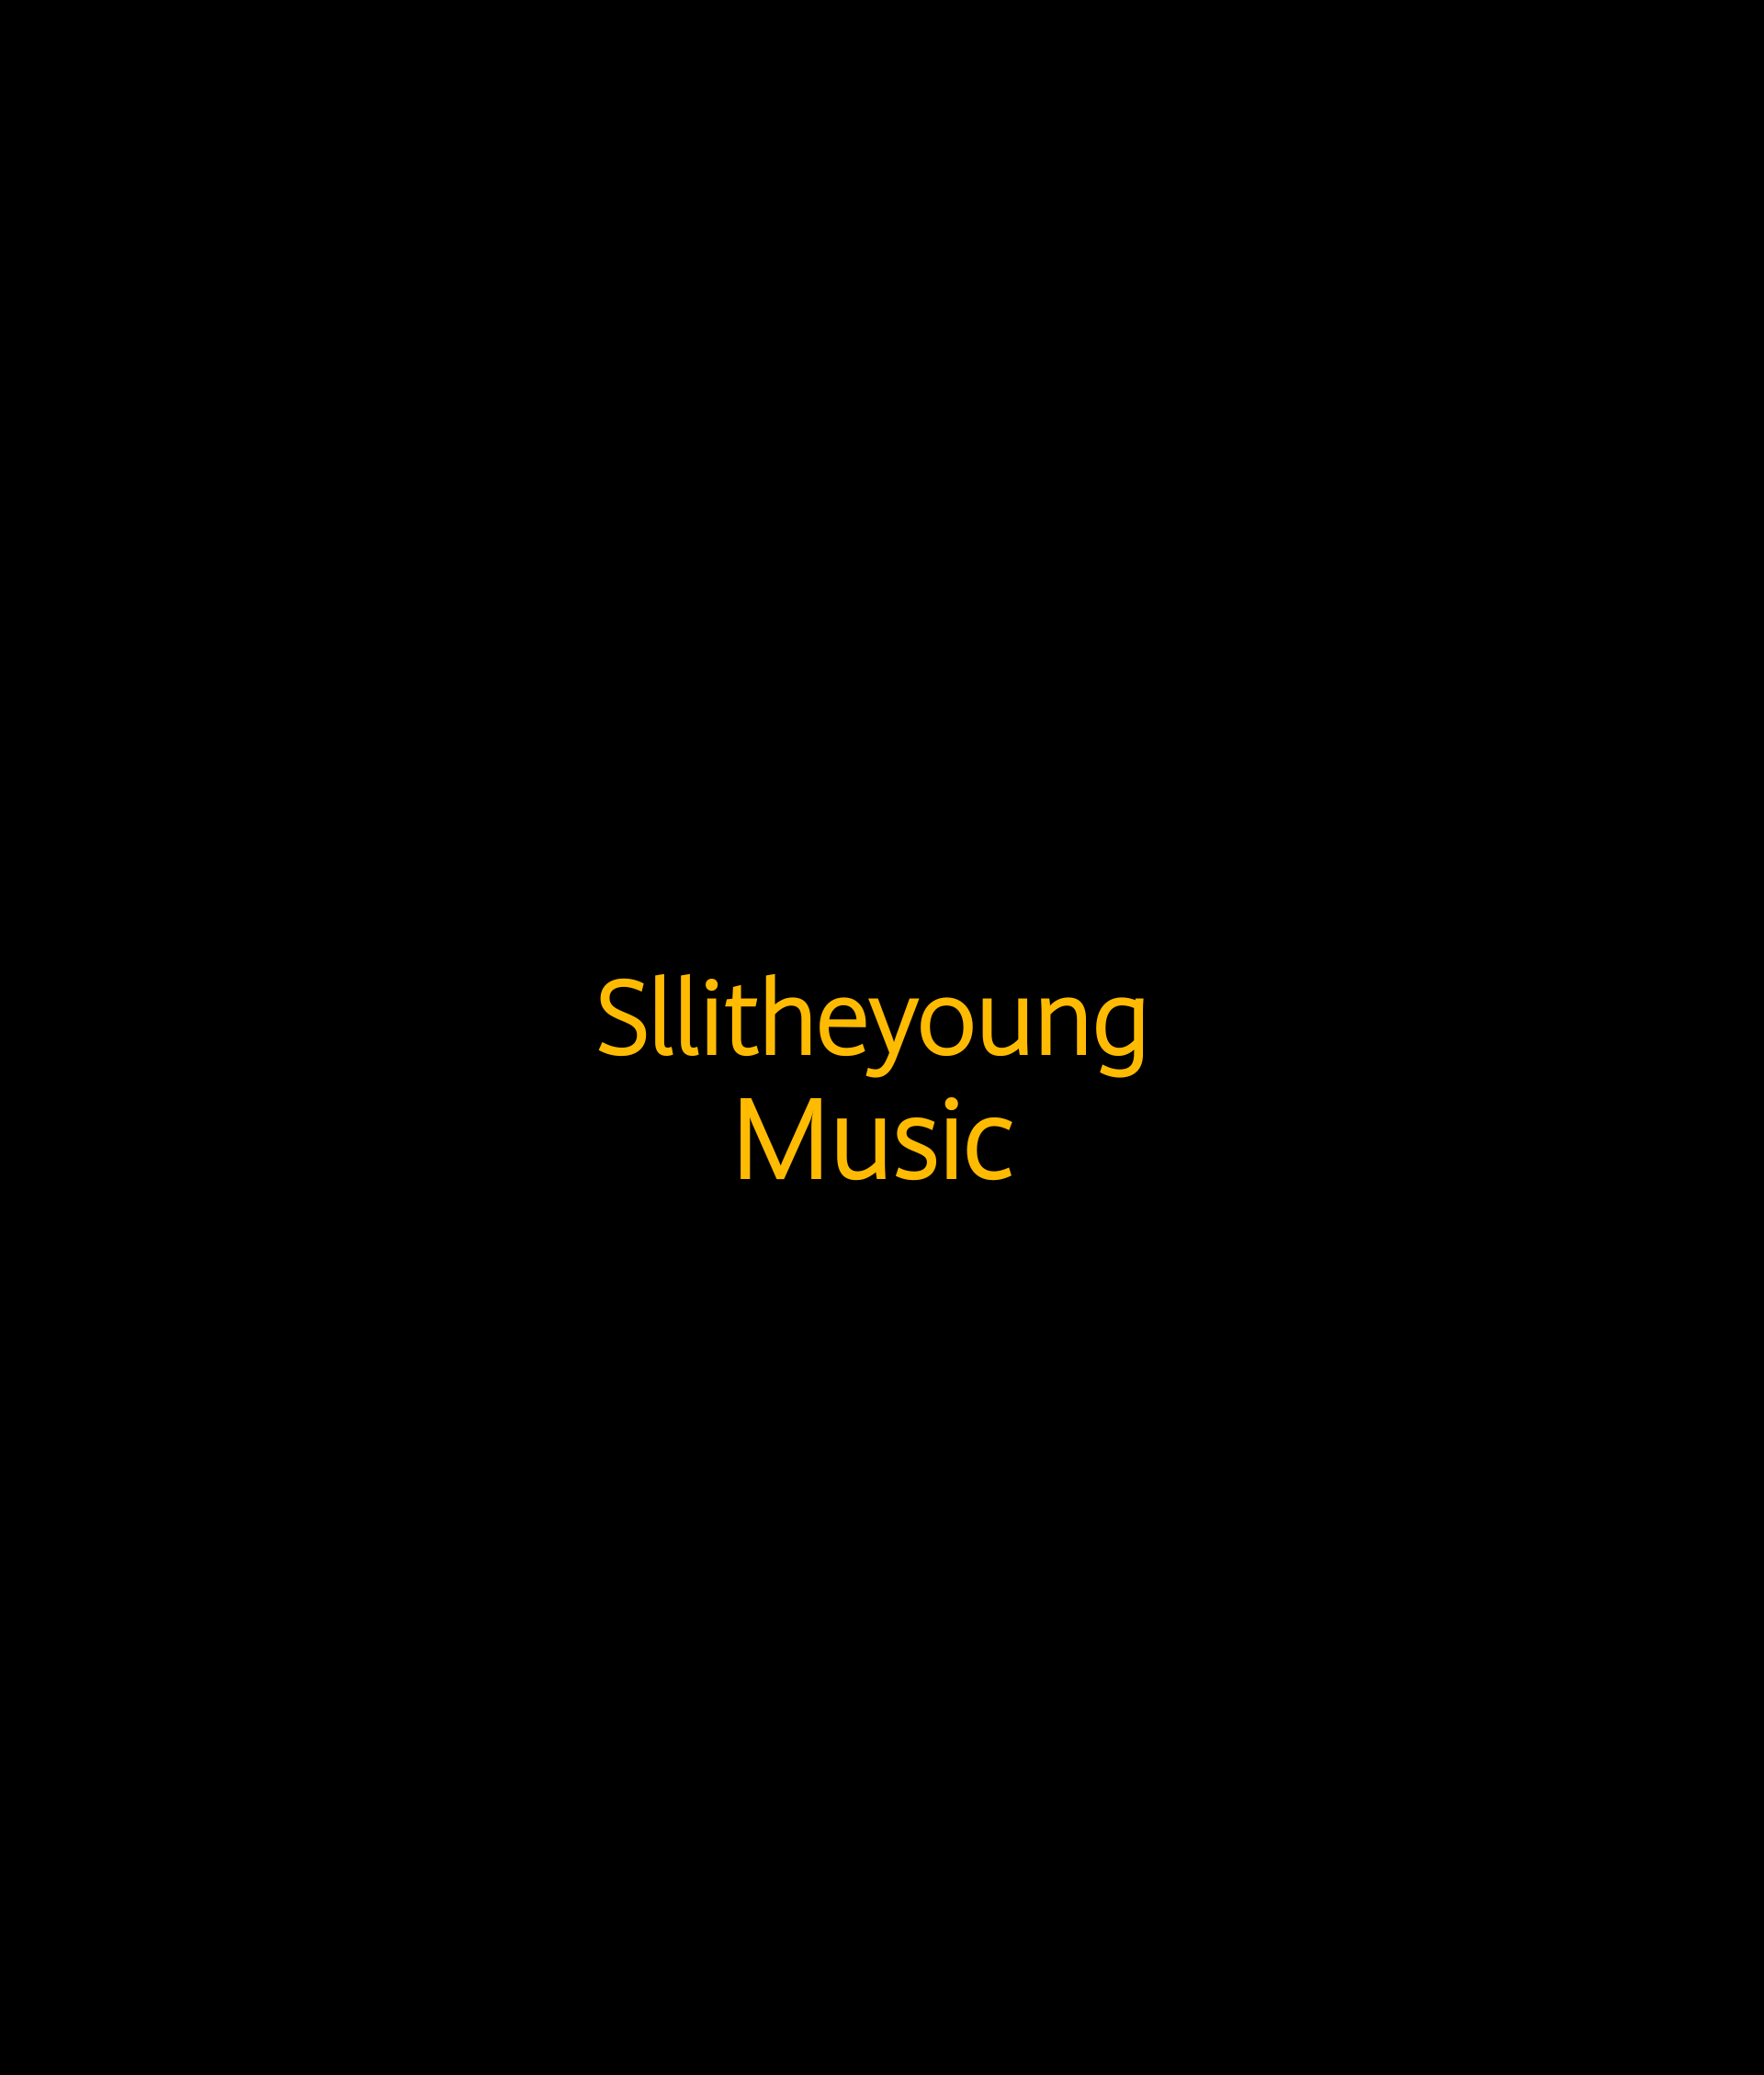 sllitheyoung